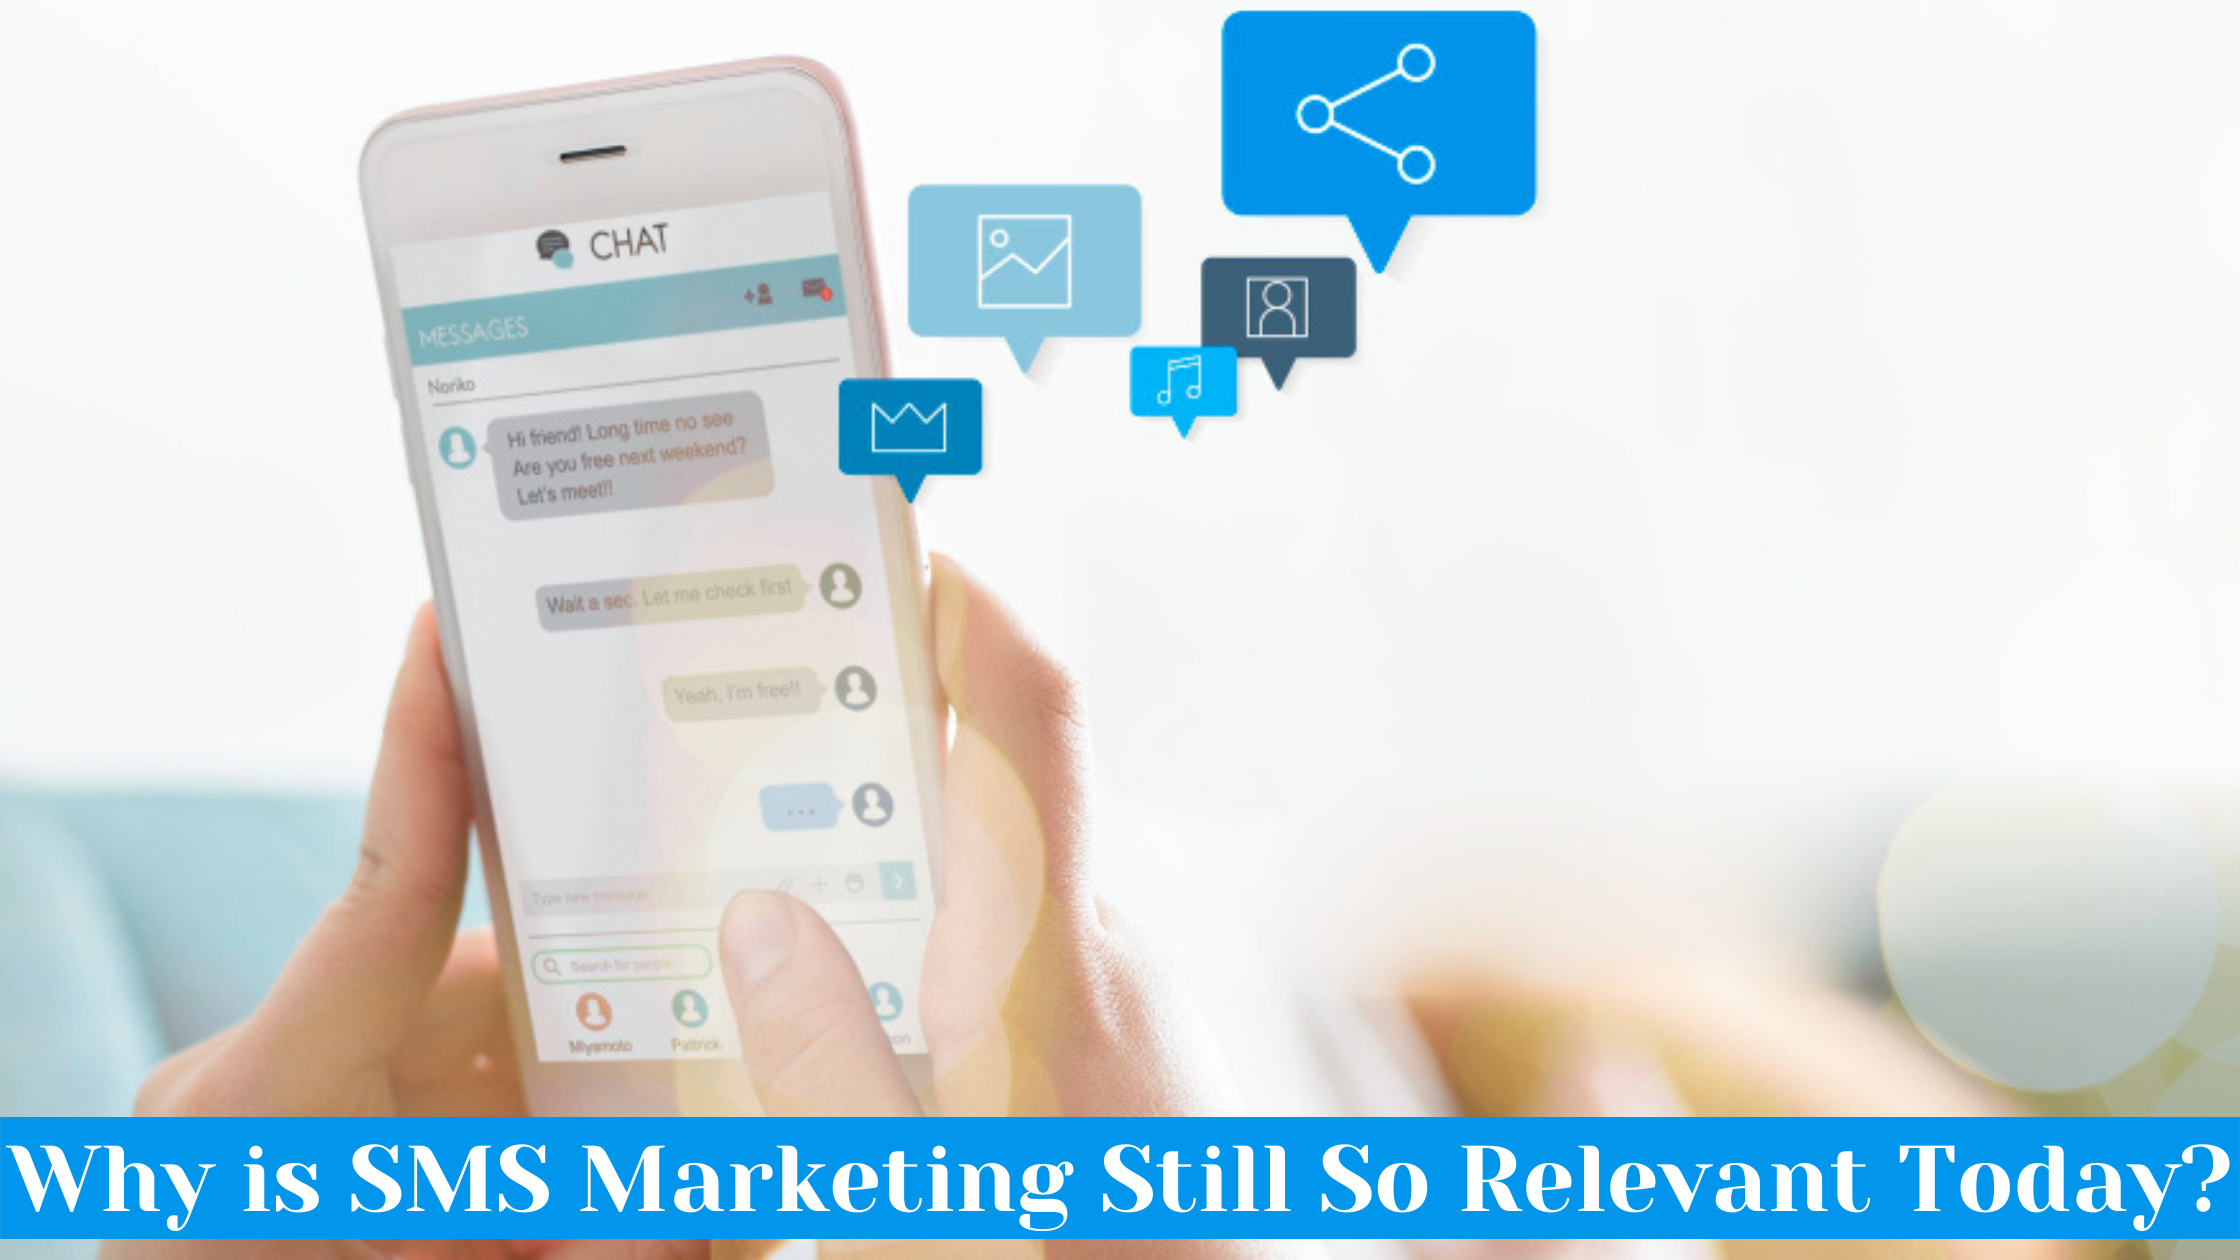 Why is SMS Marketing Still So Relevant Today